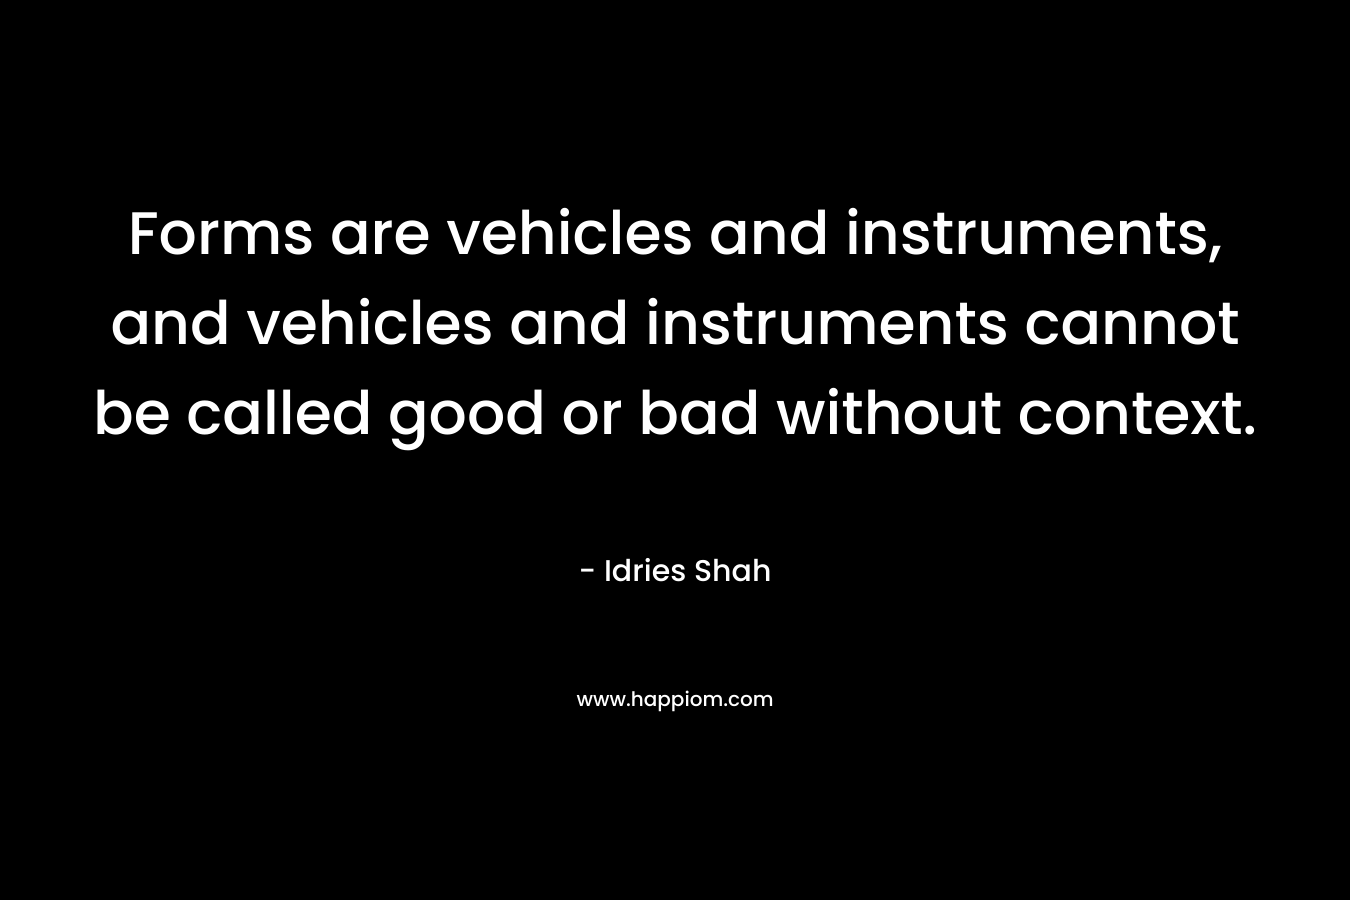 Forms are vehicles and instruments, and vehicles and instruments cannot be called good or bad without context.